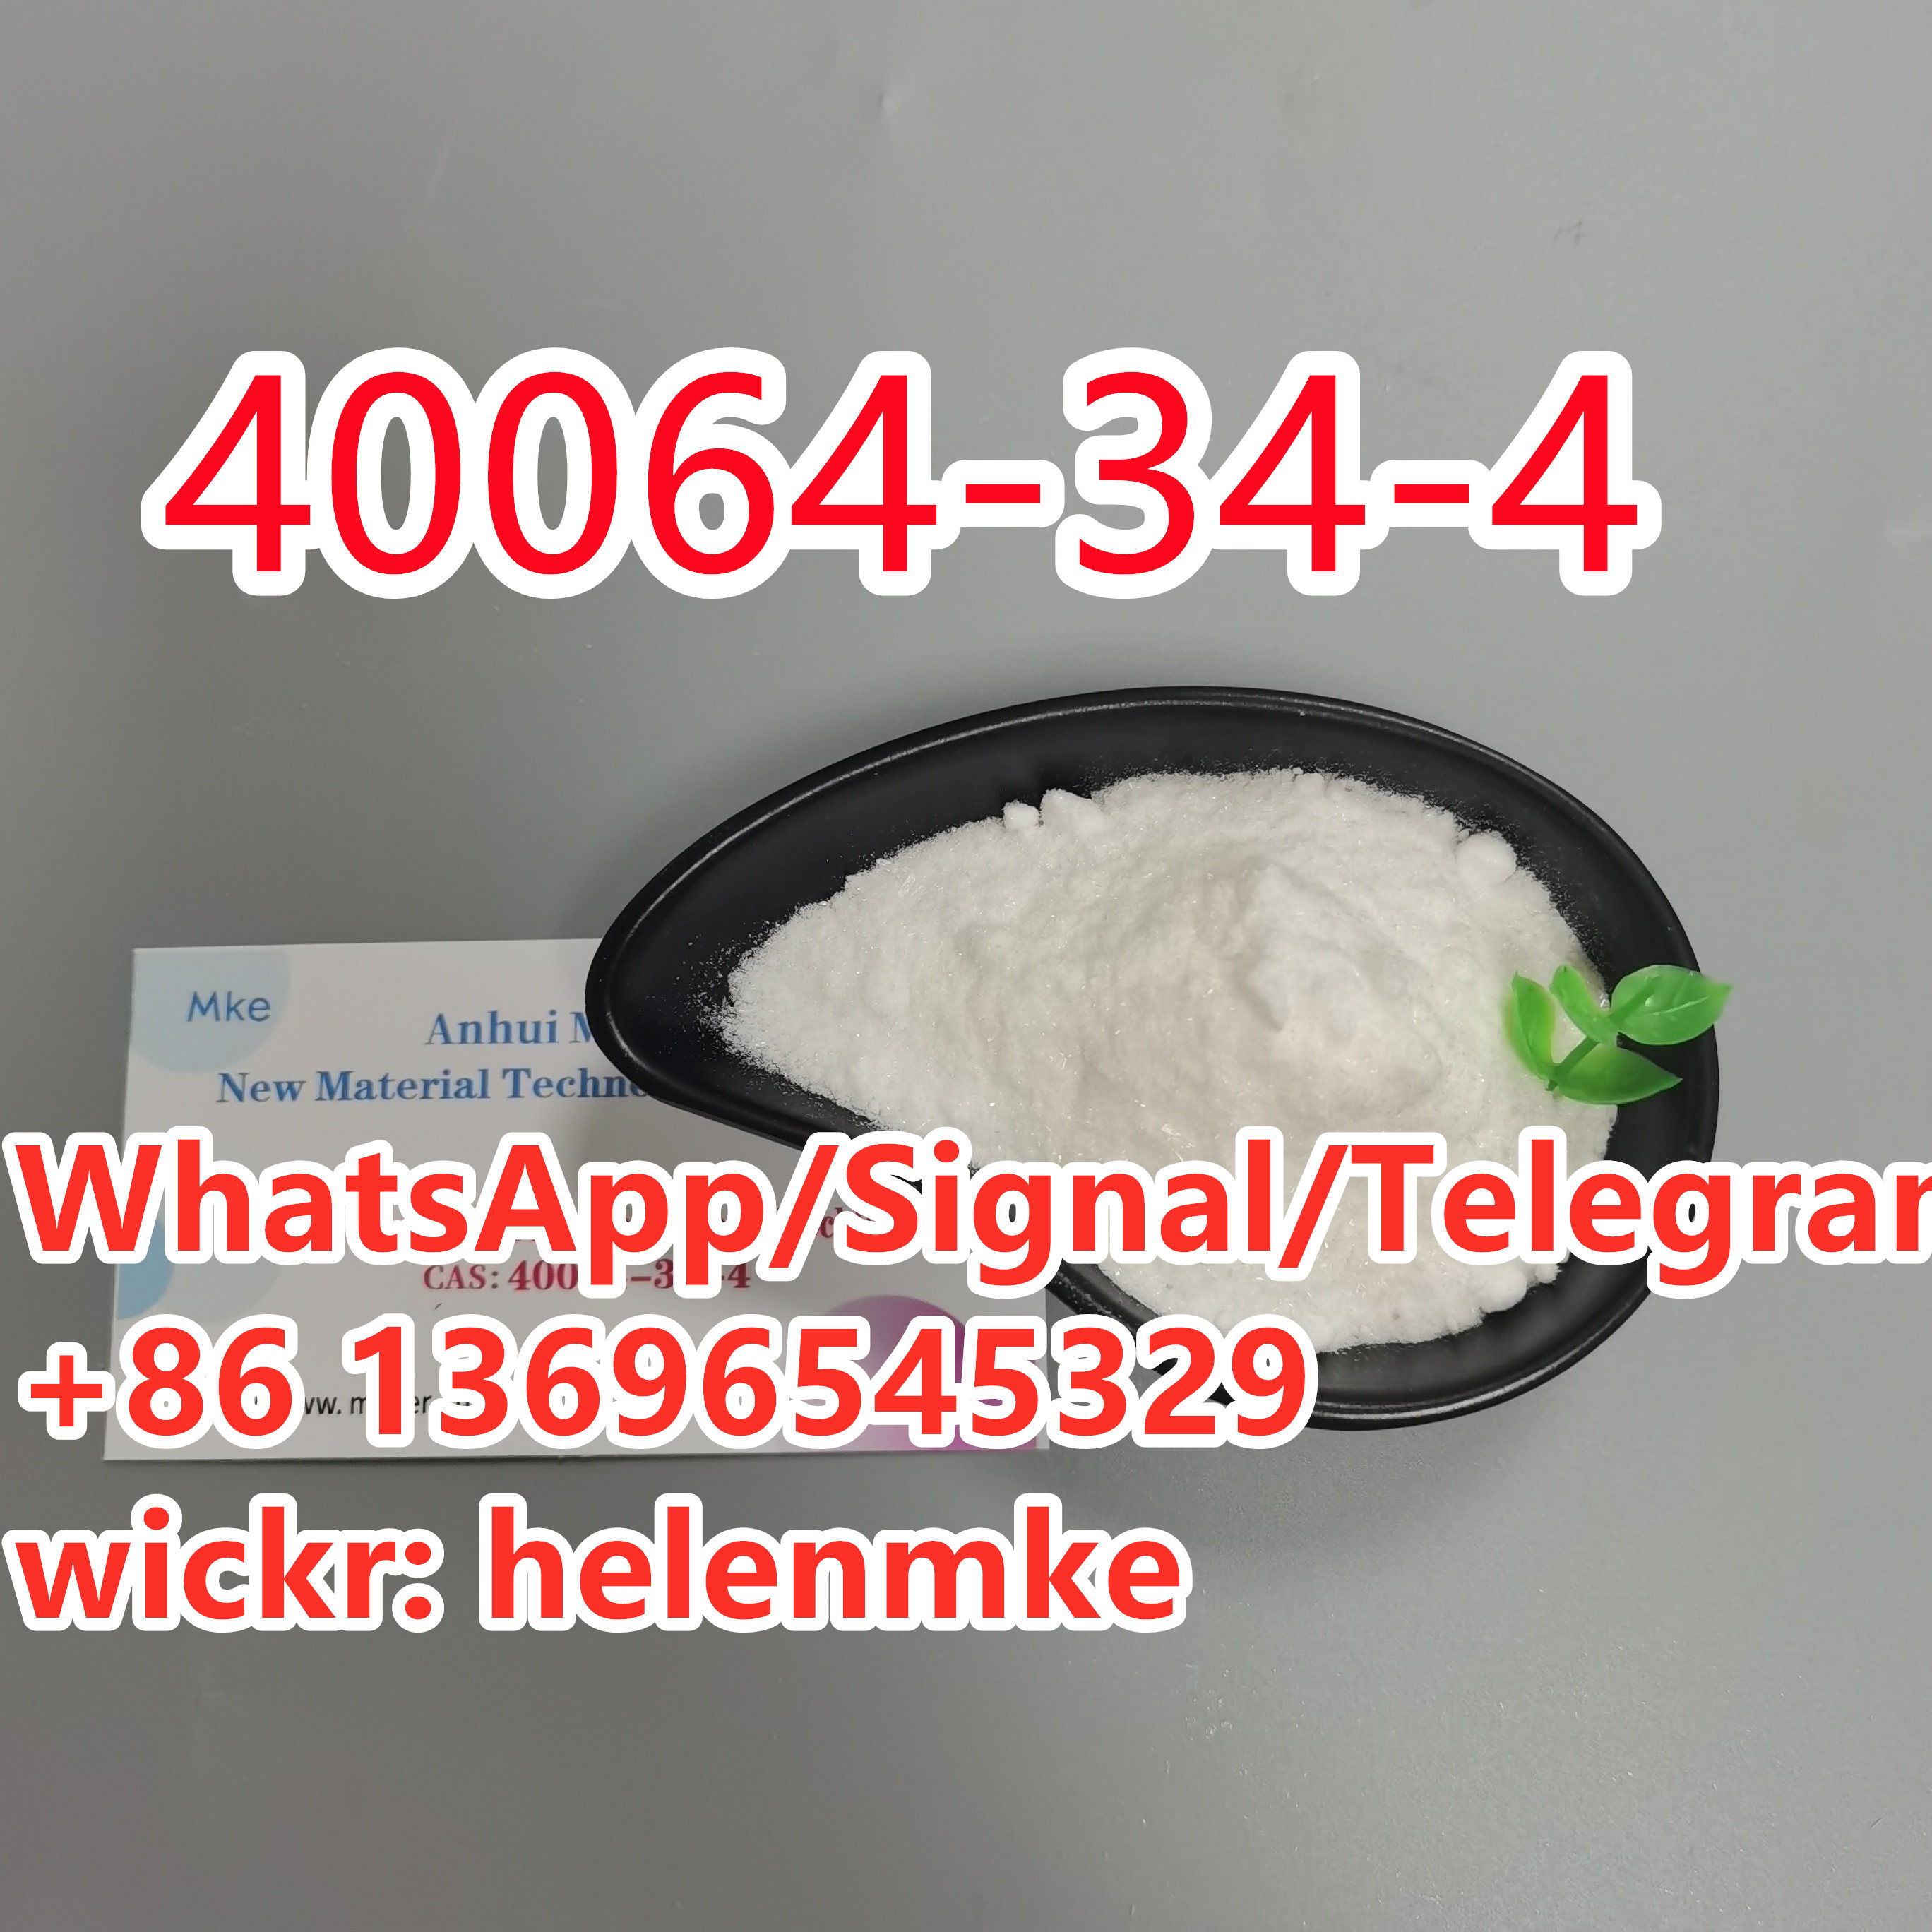 99% High Quality 4, 4-Piperidinediol Hydrochloride CAS 40064-34-4 with Fast Delivery Best Price - photo